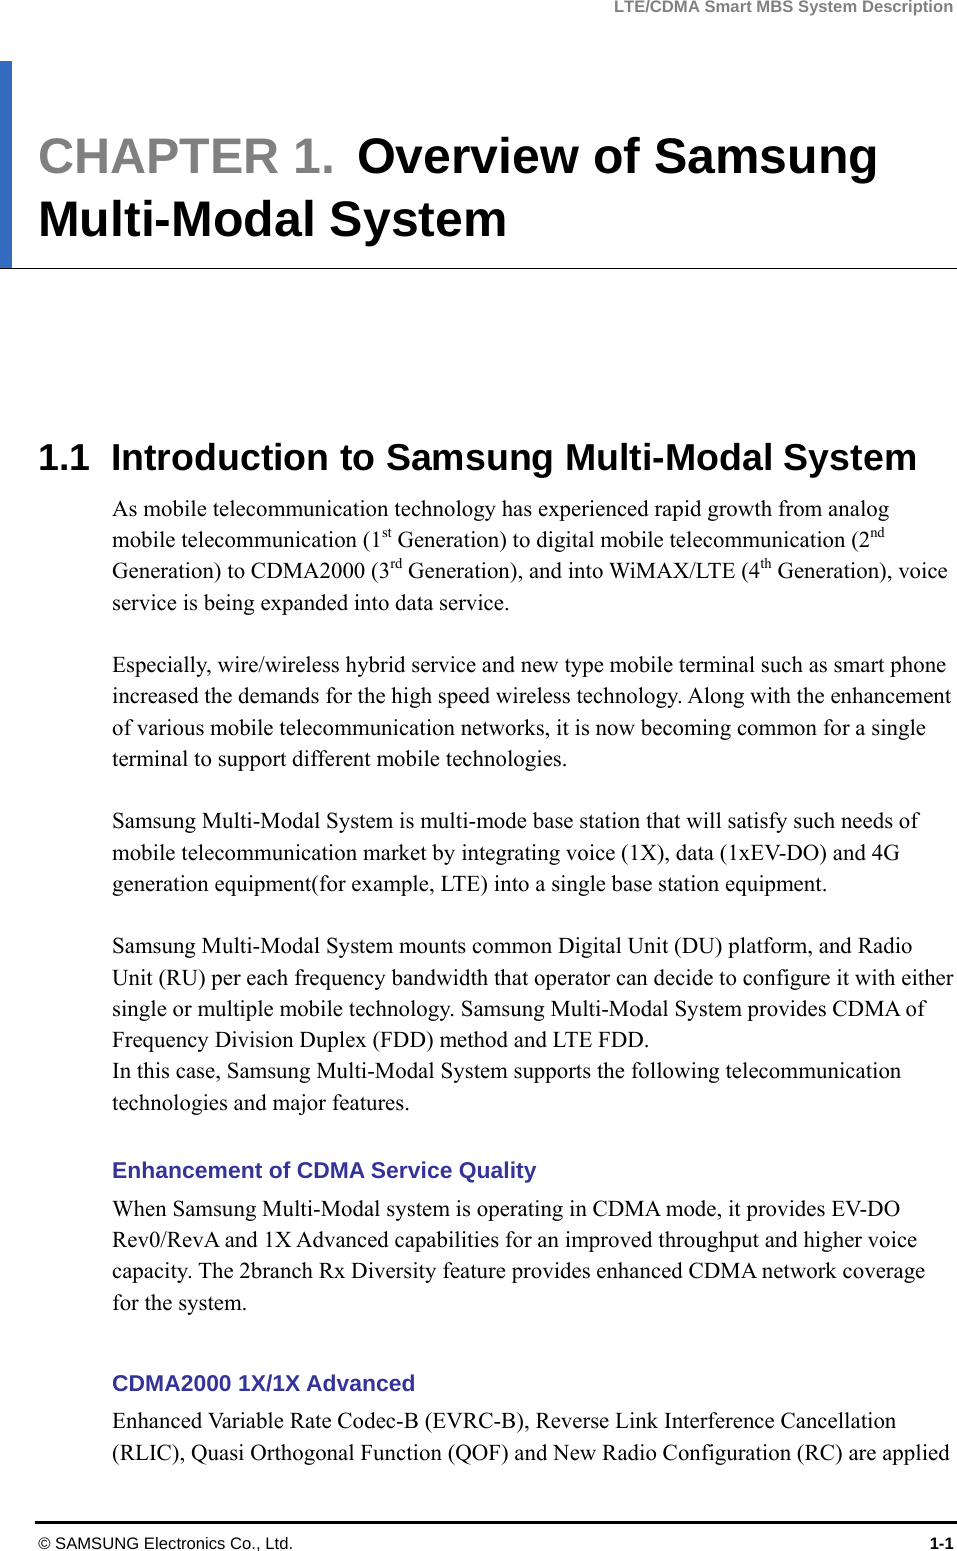 LTE/CDMA Smart MBS System Description © SAMSUNG Electronics Co., Ltd.  1-1 CHAPTER 1.  Overview of Samsung Multi-Modal System        1.1  Introduction to Samsung Multi-Modal System As mobile telecommunication technology has experienced rapid growth from analog mobile telecommunication (1st Generation) to digital mobile telecommunication (2nd Generation) to CDMA2000 (3rd Generation), and into WiMAX/LTE (4th Generation), voice service is being expanded into data service.    Especially, wire/wireless hybrid service and new type mobile terminal such as smart phone increased the demands for the high speed wireless technology. Along with the enhancement of various mobile telecommunication networks, it is now becoming common for a single terminal to support different mobile technologies.  Samsung Multi-Modal System is multi-mode base station that will satisfy such needs of mobile telecommunication market by integrating voice (1X), data (1xEV-DO) and 4G generation equipment(for example, LTE) into a single base station equipment.  Samsung Multi-Modal System mounts common Digital Unit (DU) platform, and Radio Unit (RU) per each frequency bandwidth that operator can decide to configure it with either single or multiple mobile technology. Samsung Multi-Modal System provides CDMA of Frequency Division Duplex (FDD) method and LTE FDD.   In this case, Samsung Multi-Modal System supports the following telecommunication technologies and major features.  Enhancement of CDMA Service Quality When Samsung Multi-Modal system is operating in CDMA mode, it provides EV-DO Rev0/RevA and 1X Advanced capabilities for an improved throughput and higher voice capacity. The 2branch Rx Diversity feature provides enhanced CDMA network coverage for the system.  CDMA2000 1X/1X Advanced Enhanced Variable Rate Codec-B (EVRC-B), Reverse Link Interference Cancellation (RLIC), Quasi Orthogonal Function (QOF) and New Radio Configuration (RC) are applied 